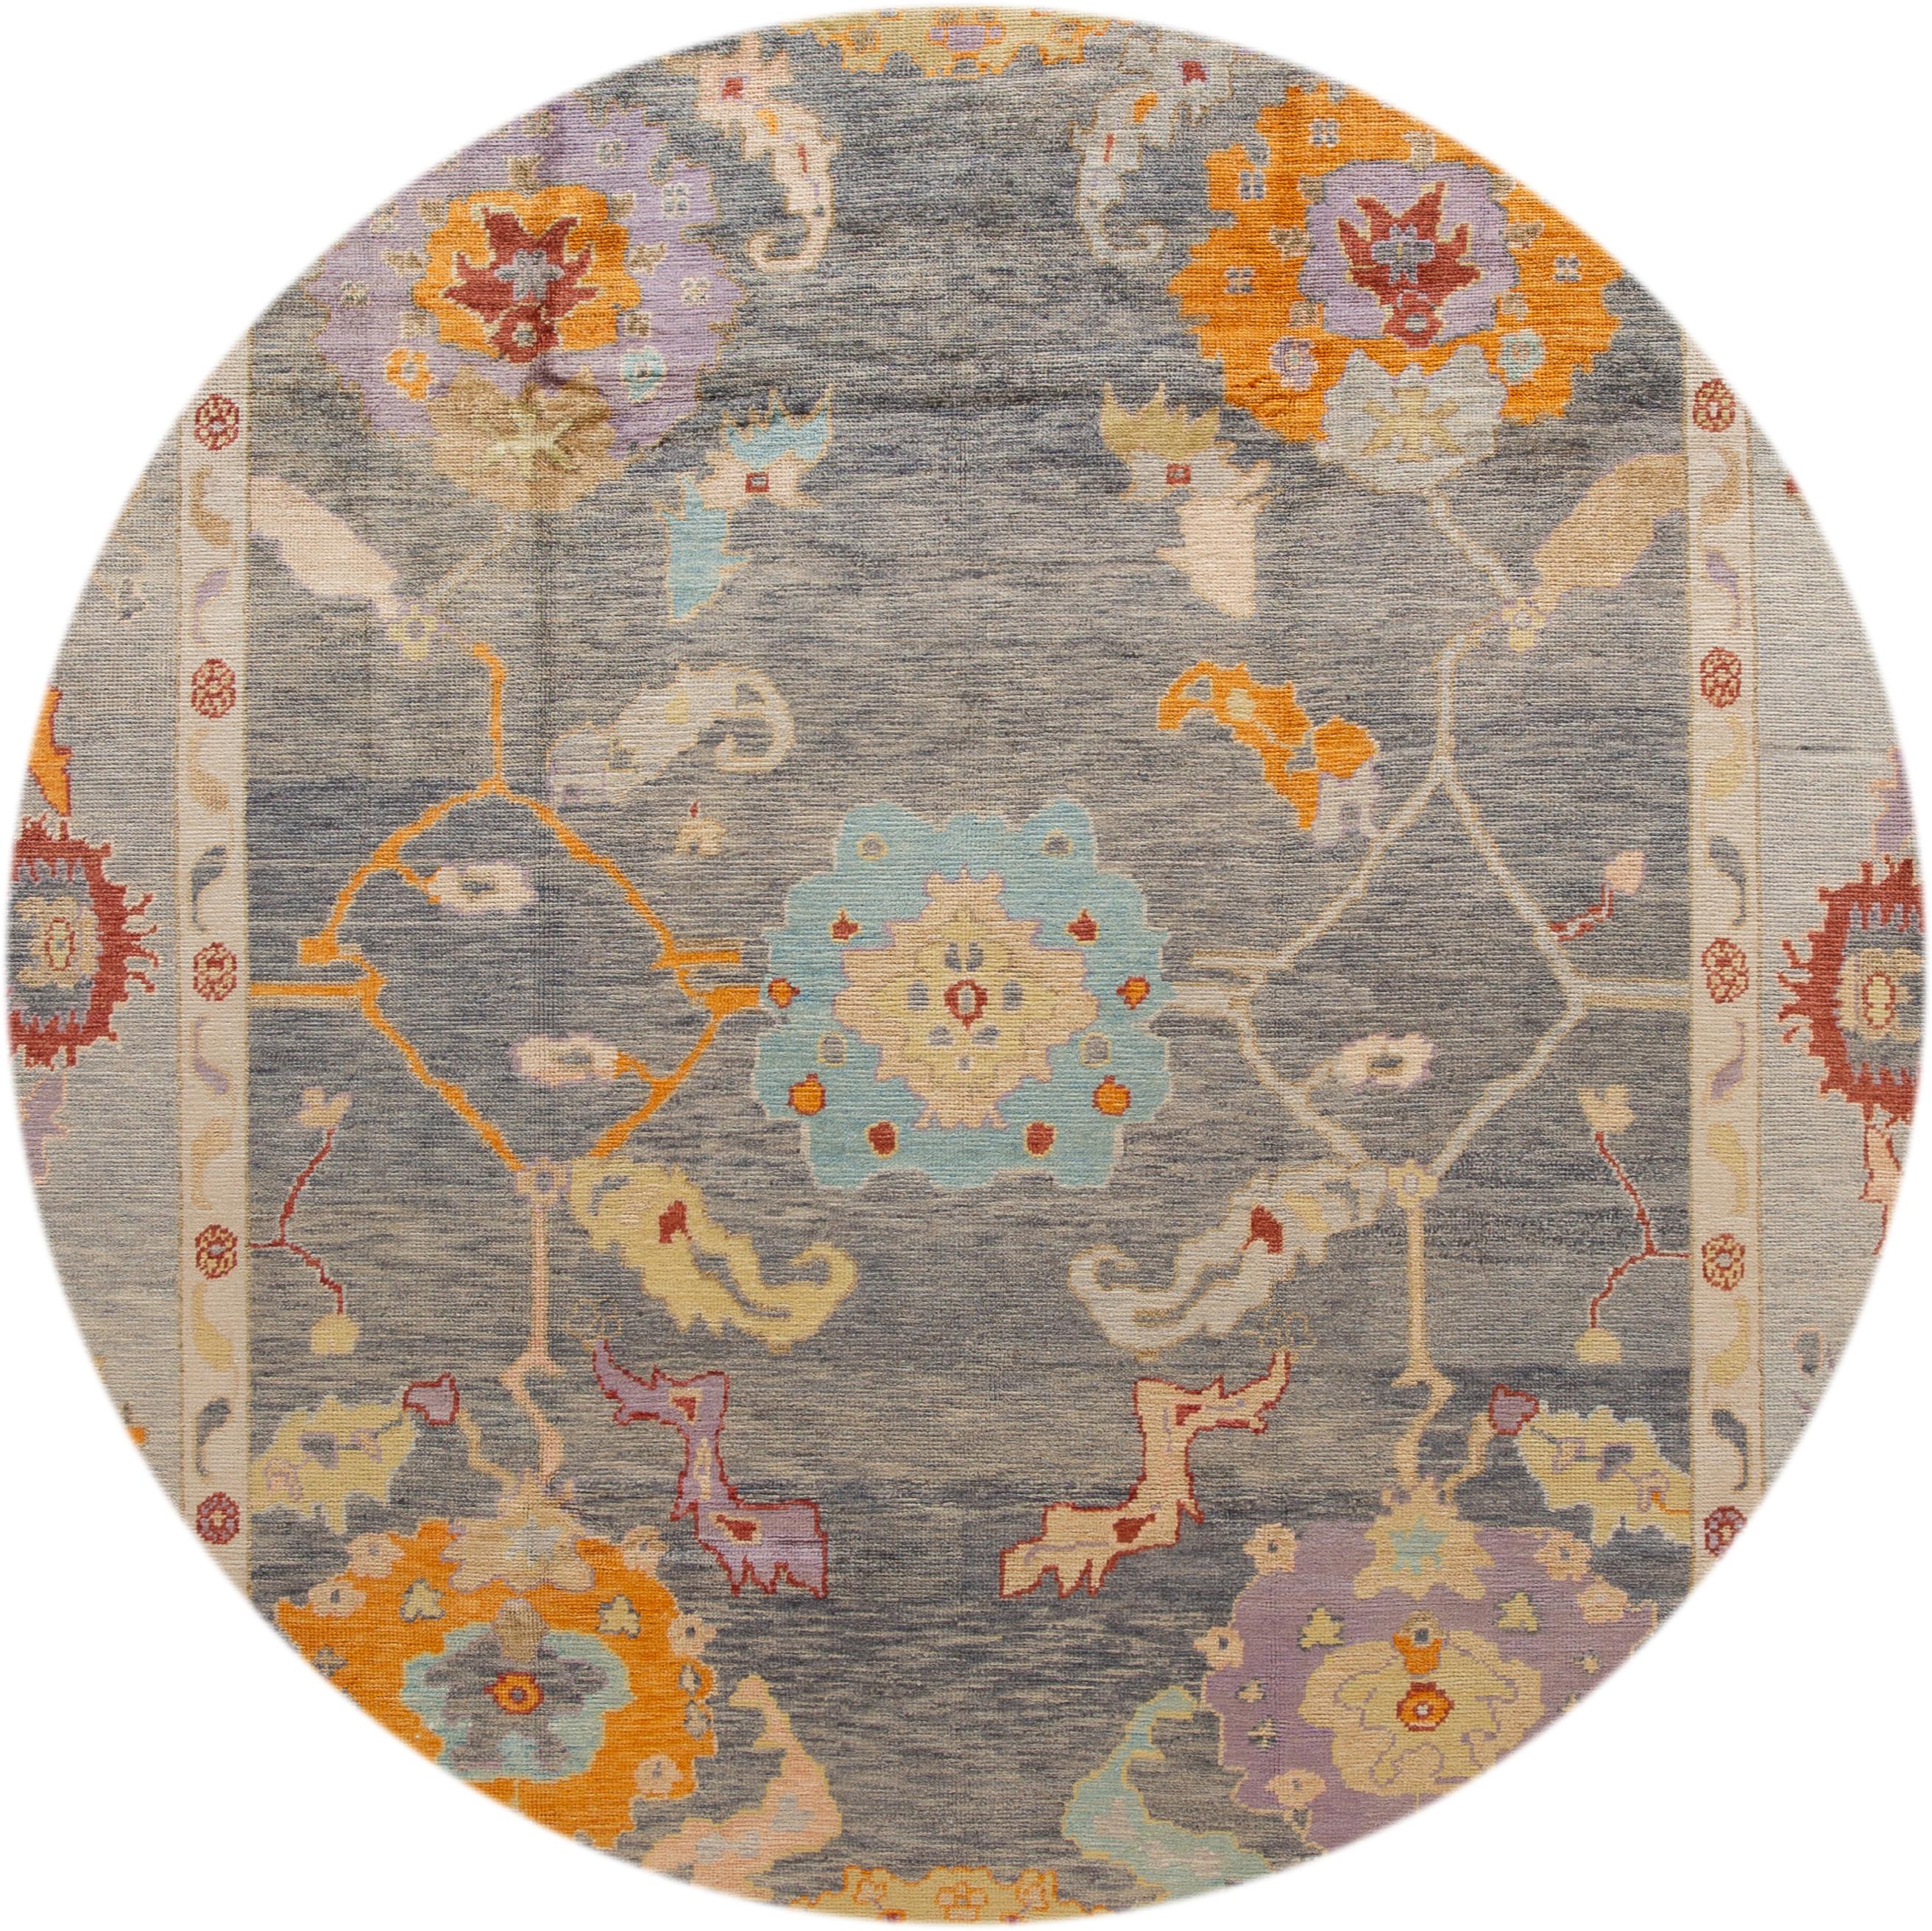 Beautiful contemporary Turkish Oushak rug, hand knotted wool with a gray field, multi-color accents in a multi medallion design.
This rug measures: 10'4